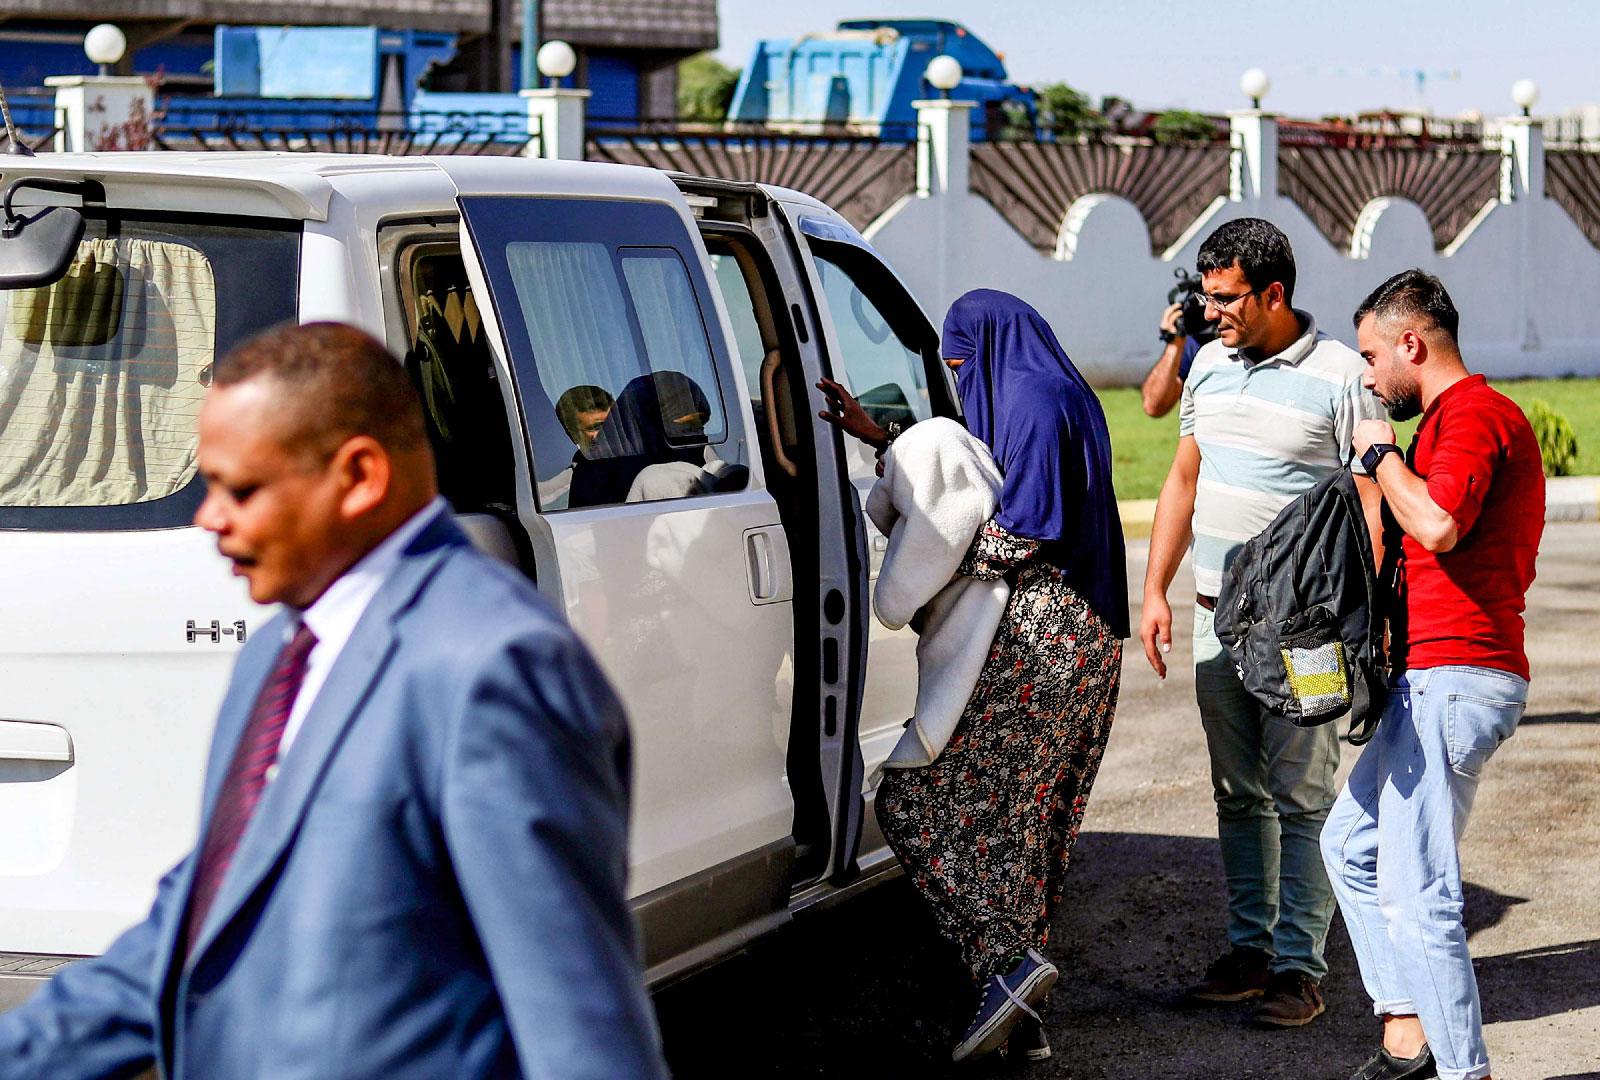 Sudanese woman (C) carrying a one-month-old baby being escorted into a vehicle in Syria's northeastern city of Qamishli.